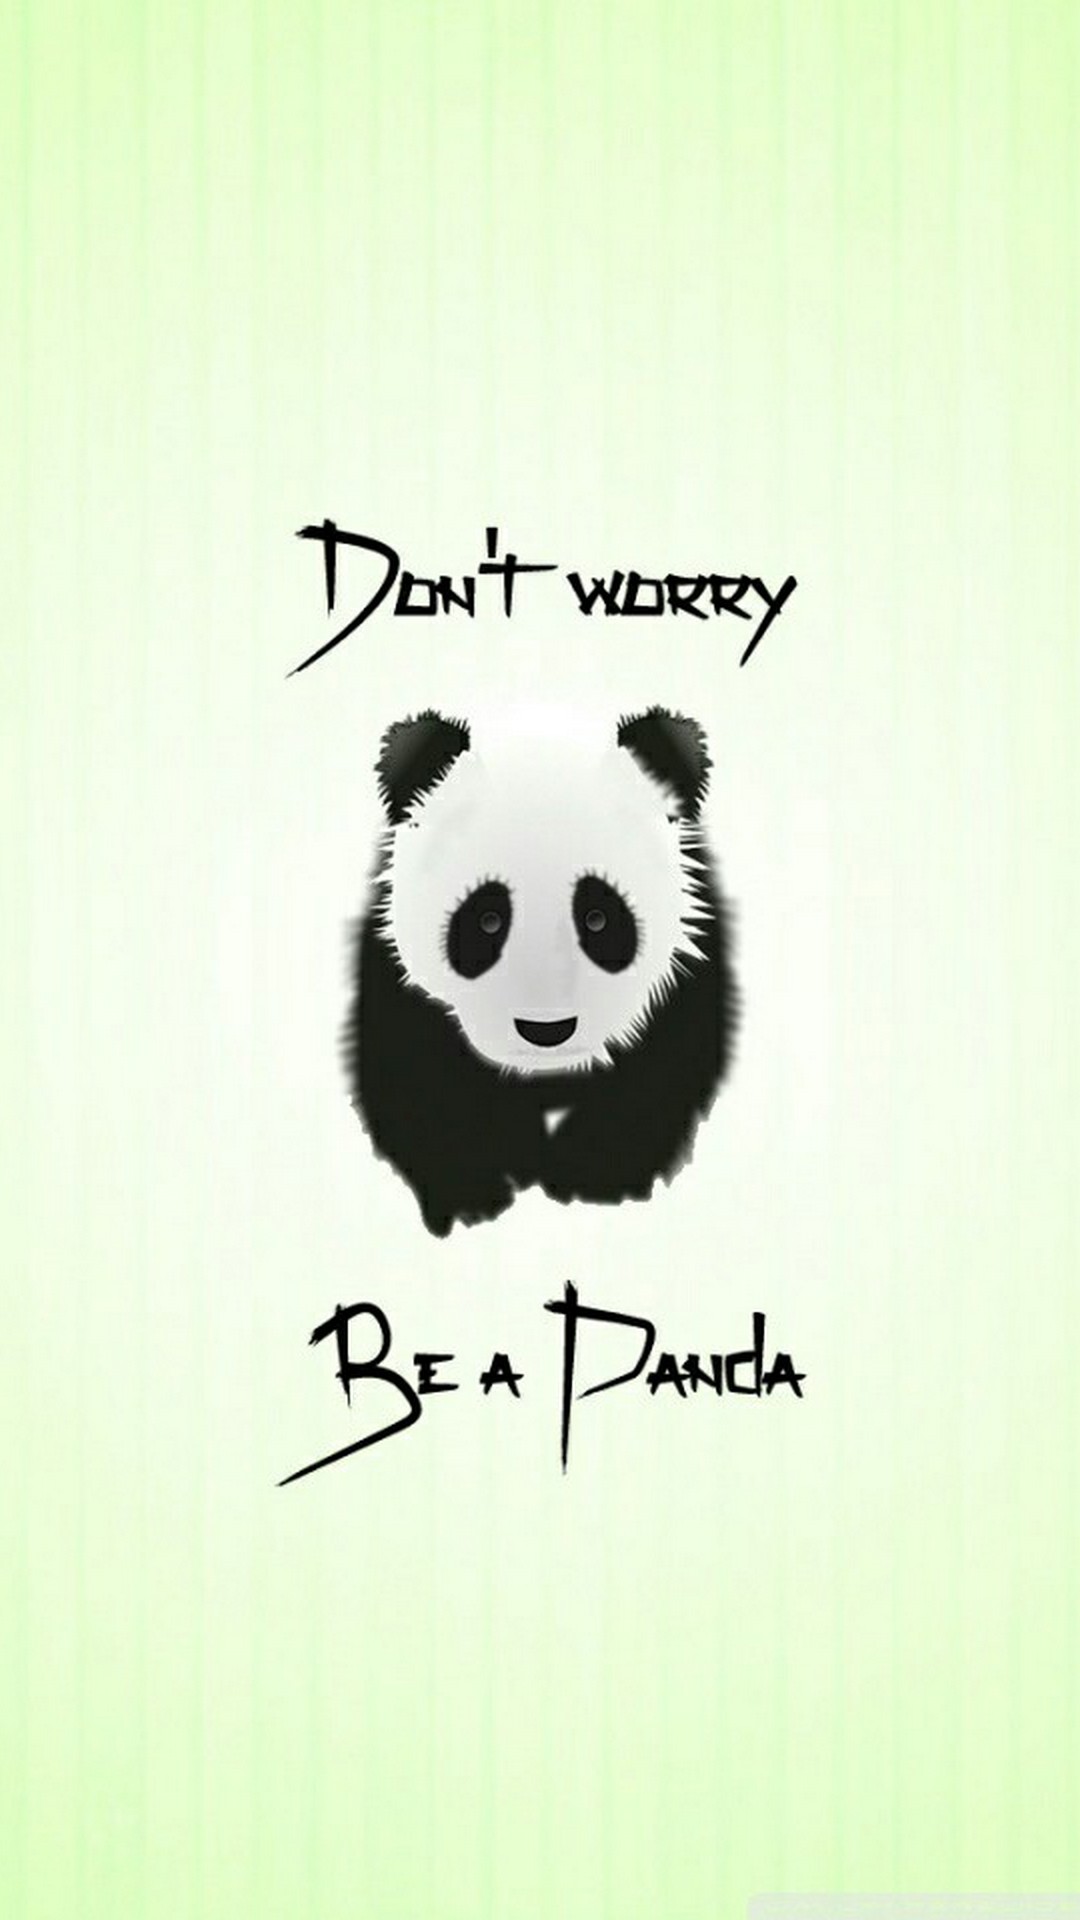 Cute Dont Worry Be a Panda iPhone Wallpaper resolution 1080x1920